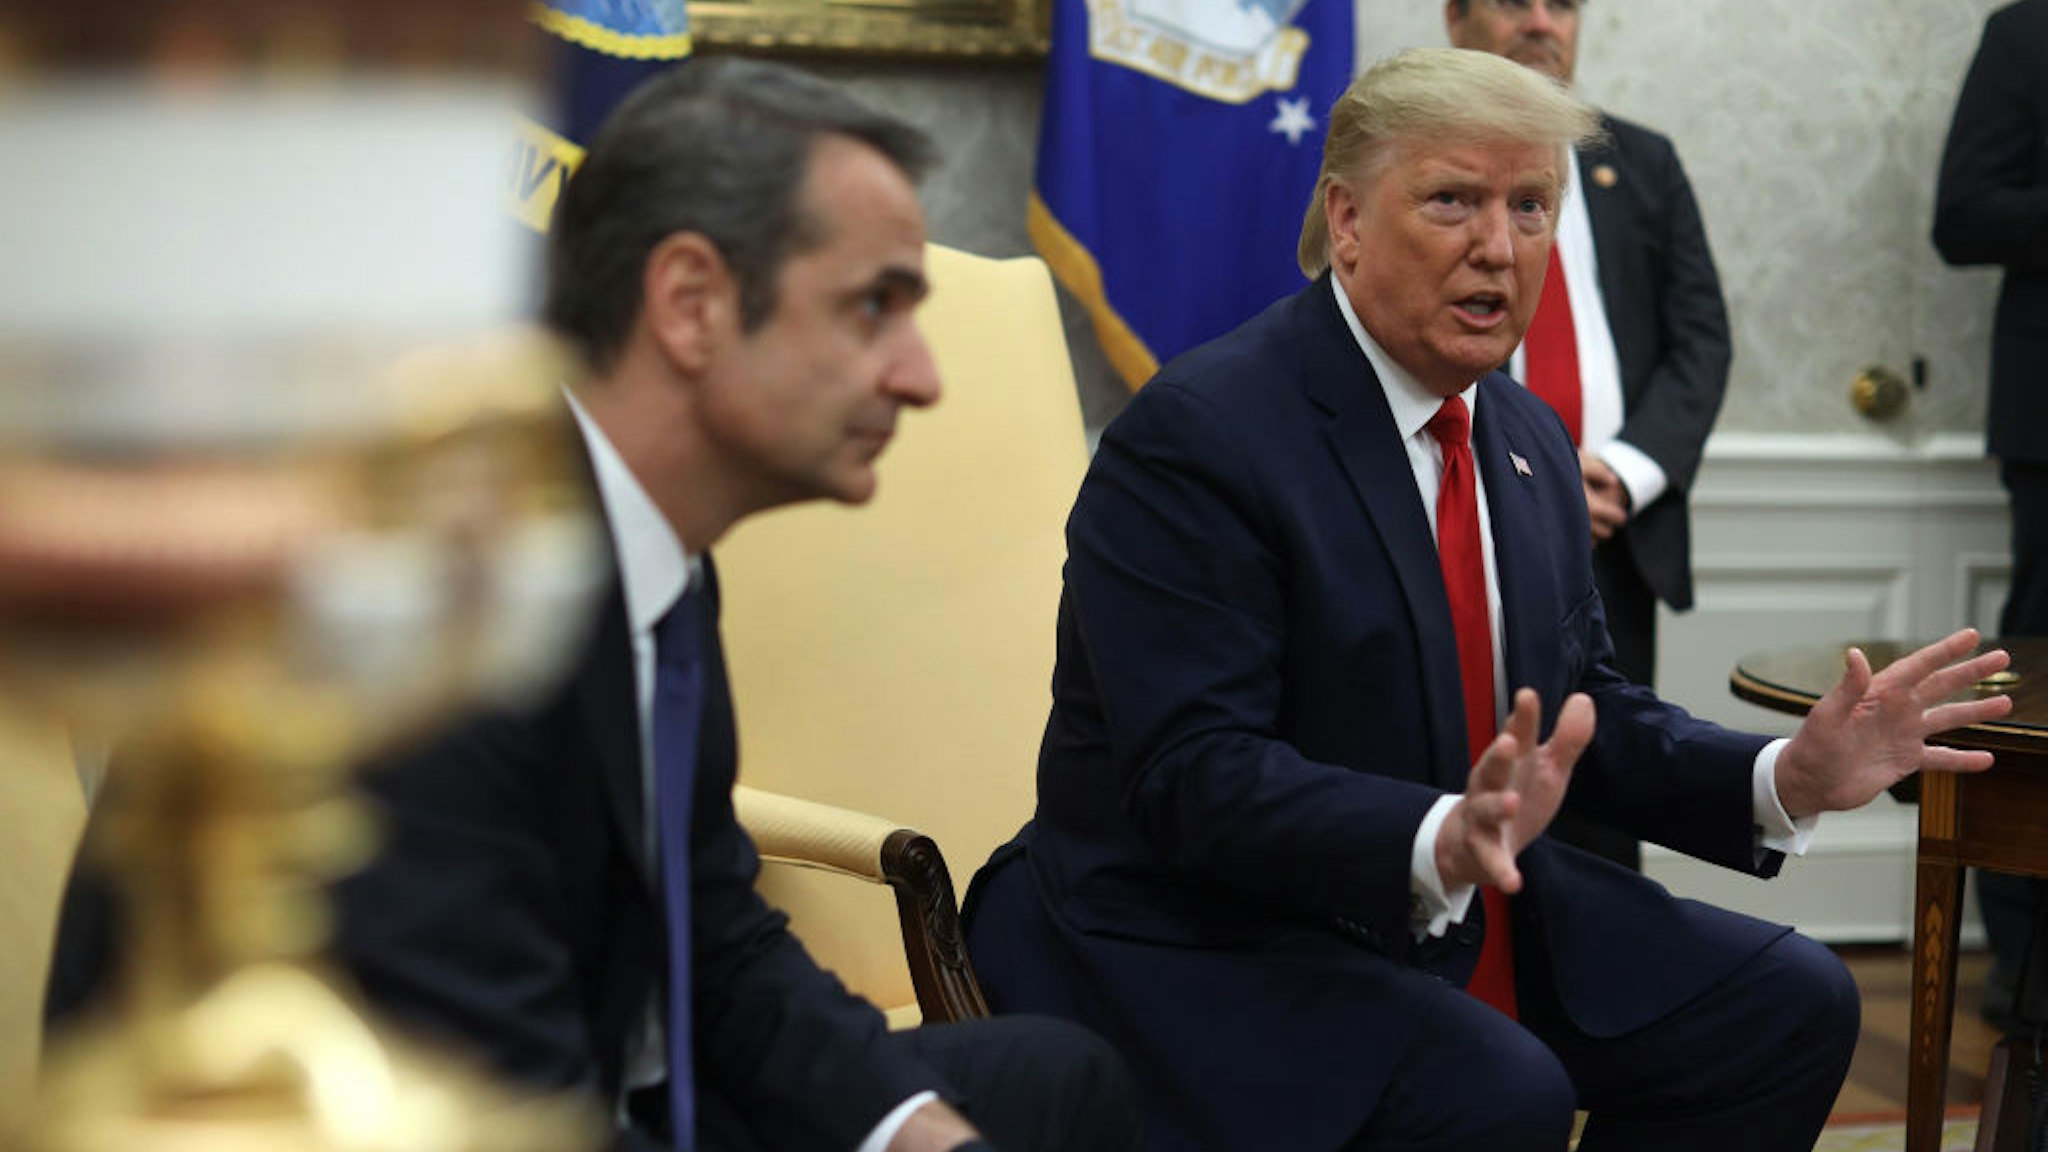 U.S. President Donald Trump speaks to members of the media as Prime Minister of Greece Kyriakos Mitsotakis listens during a meeting in the Oval Office of the White House January 7, 2020 in Washington, DC.